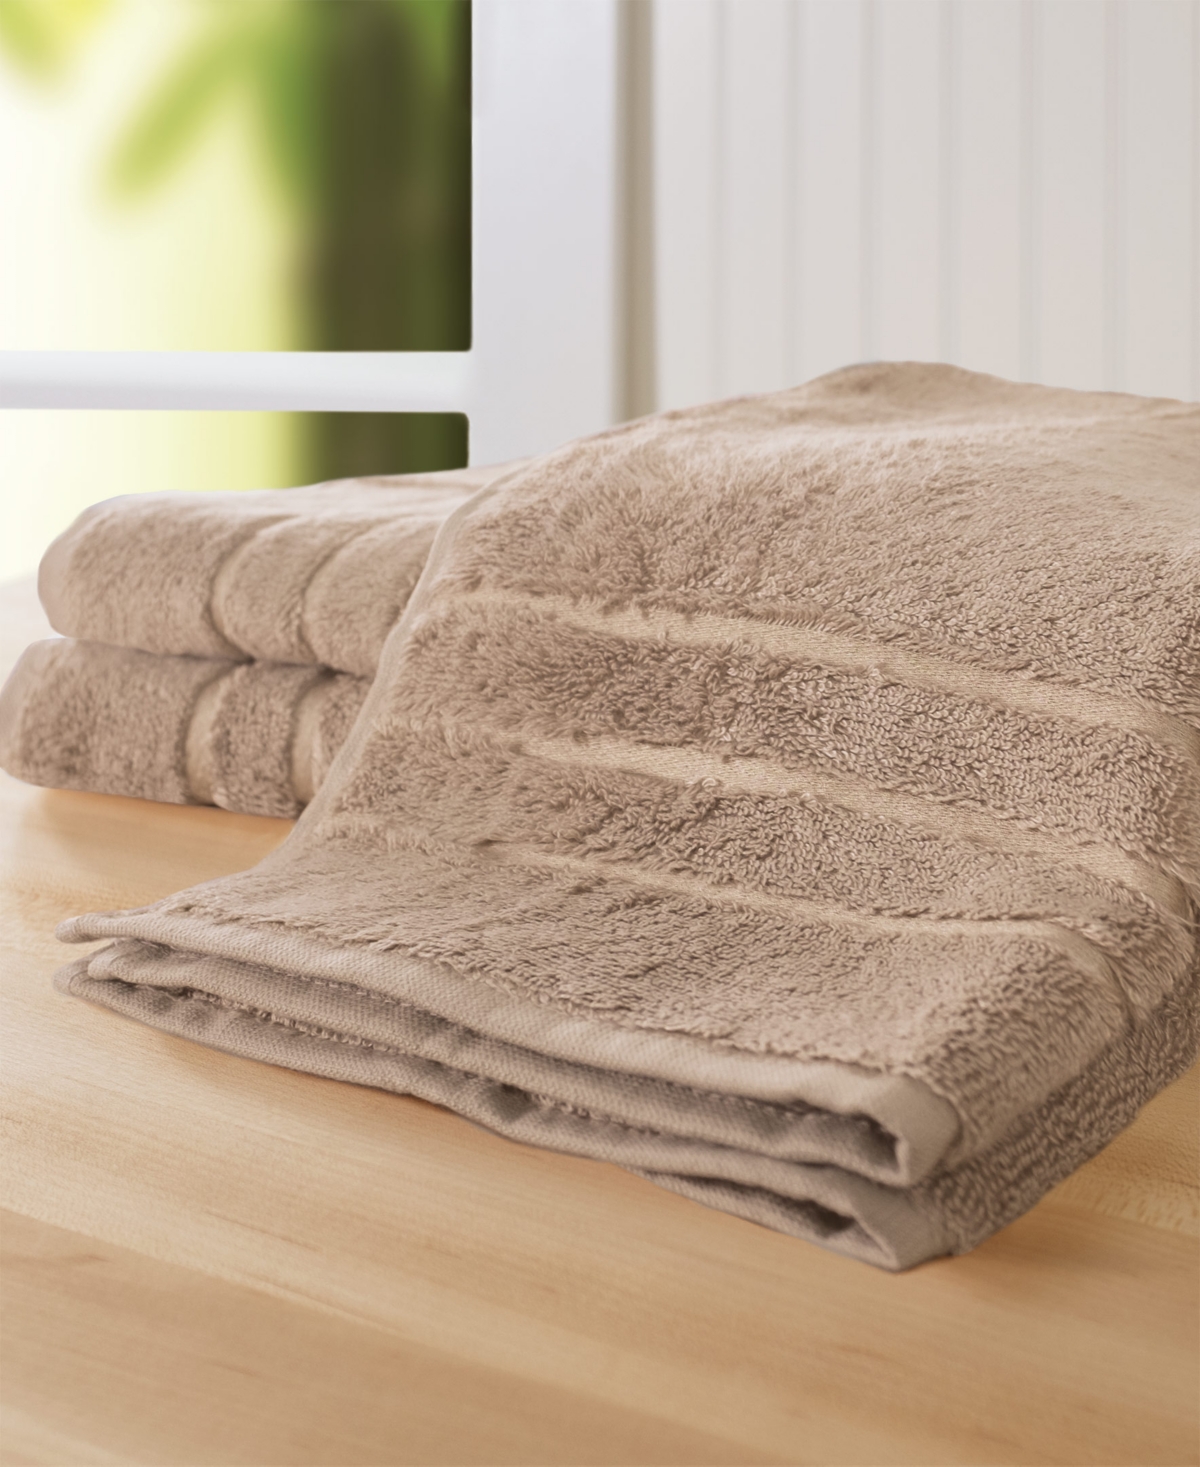 3-Piece 30" x 16" Viscose from Bamboo Hand Towel Set Bedding